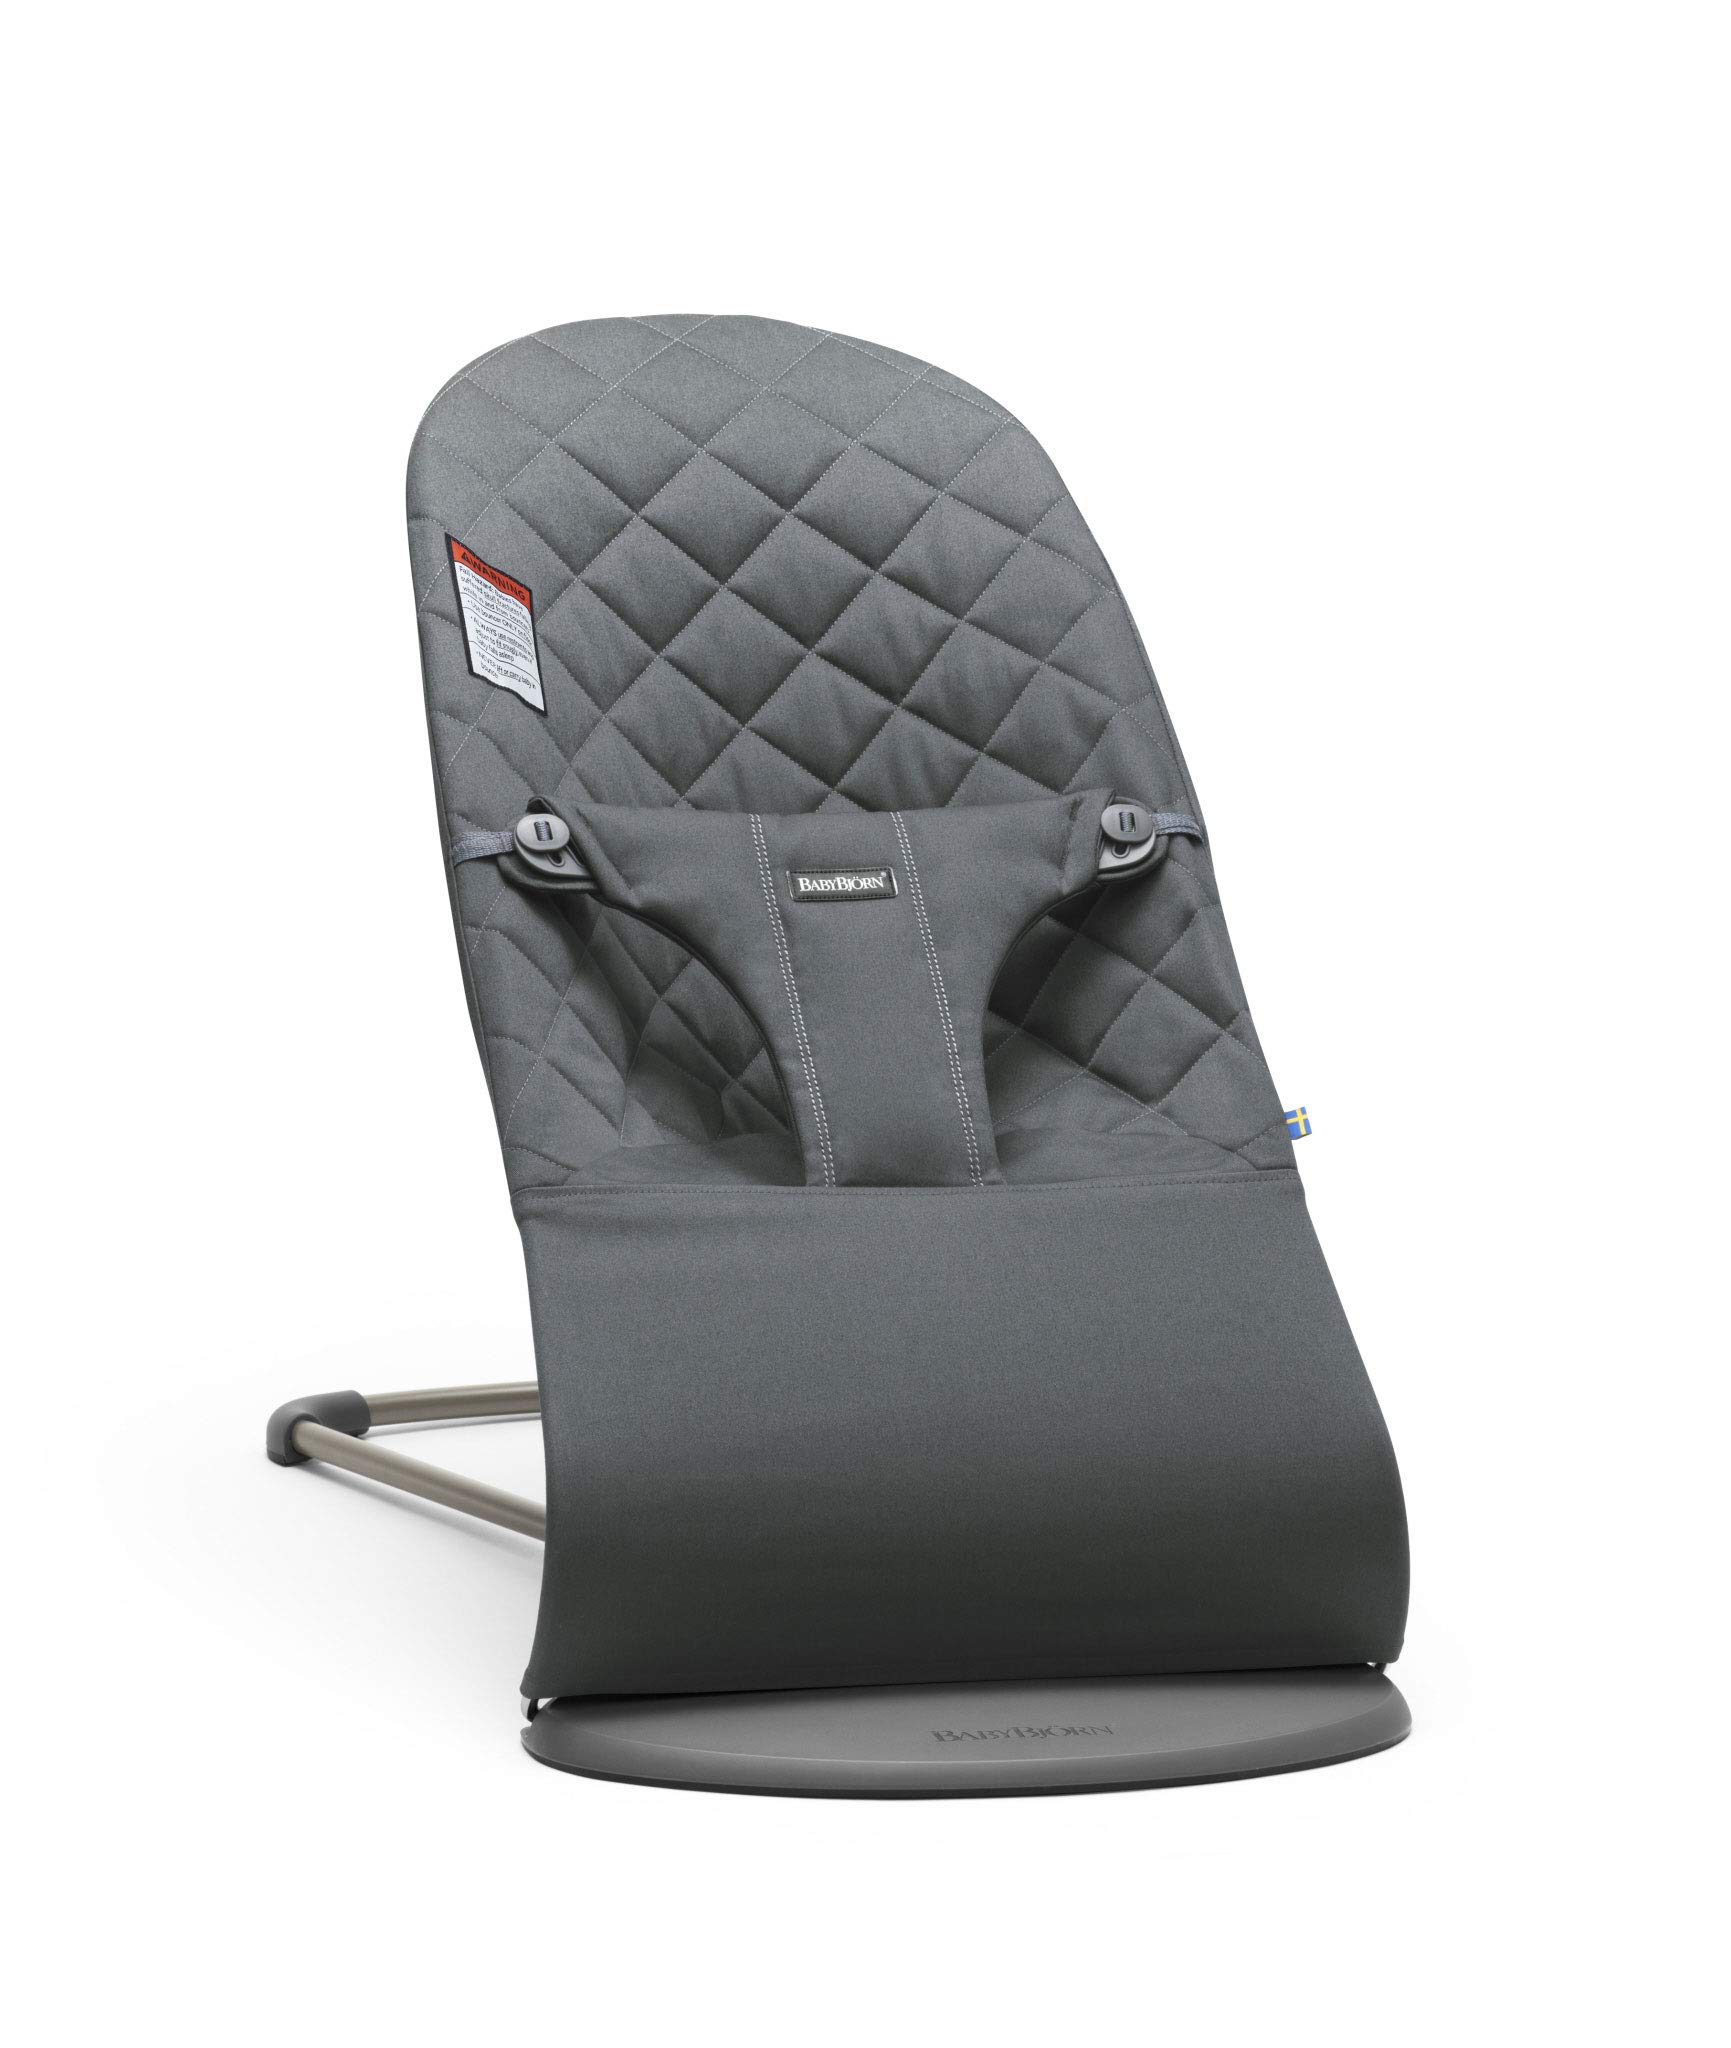 BabyBjörn Bouncer Bliss, Quilted Cotton, Anthracite (006021US)